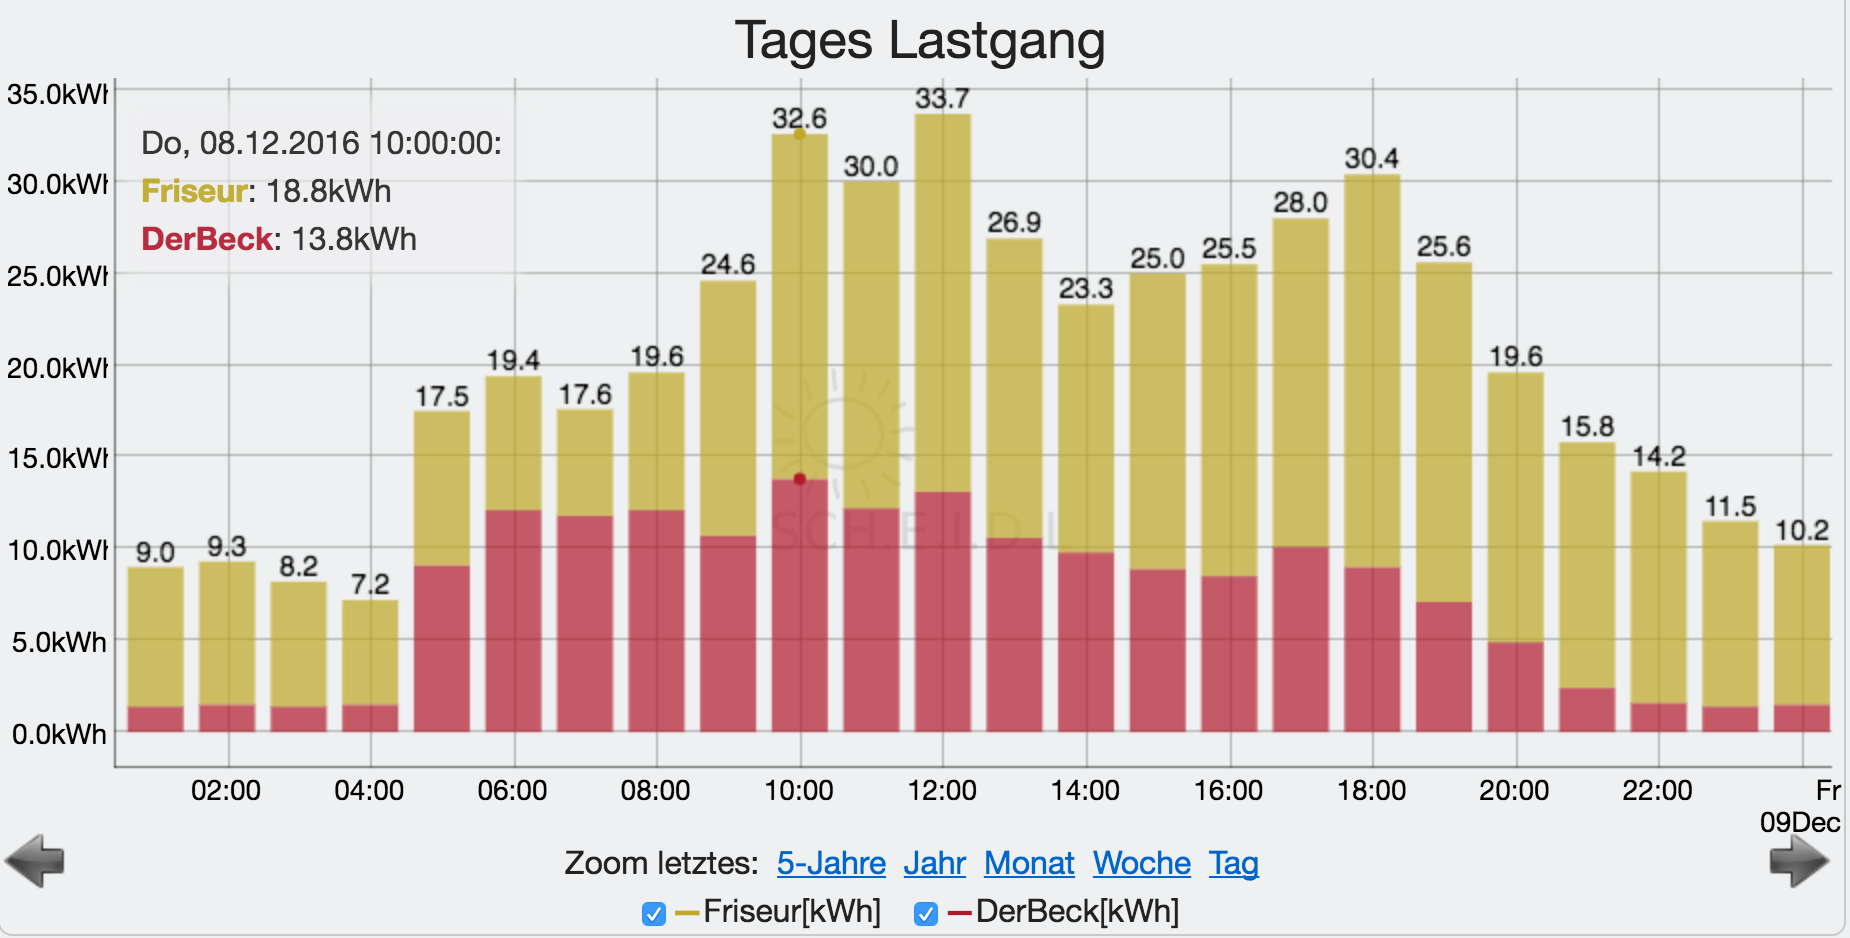 Tages-Lastgang.png